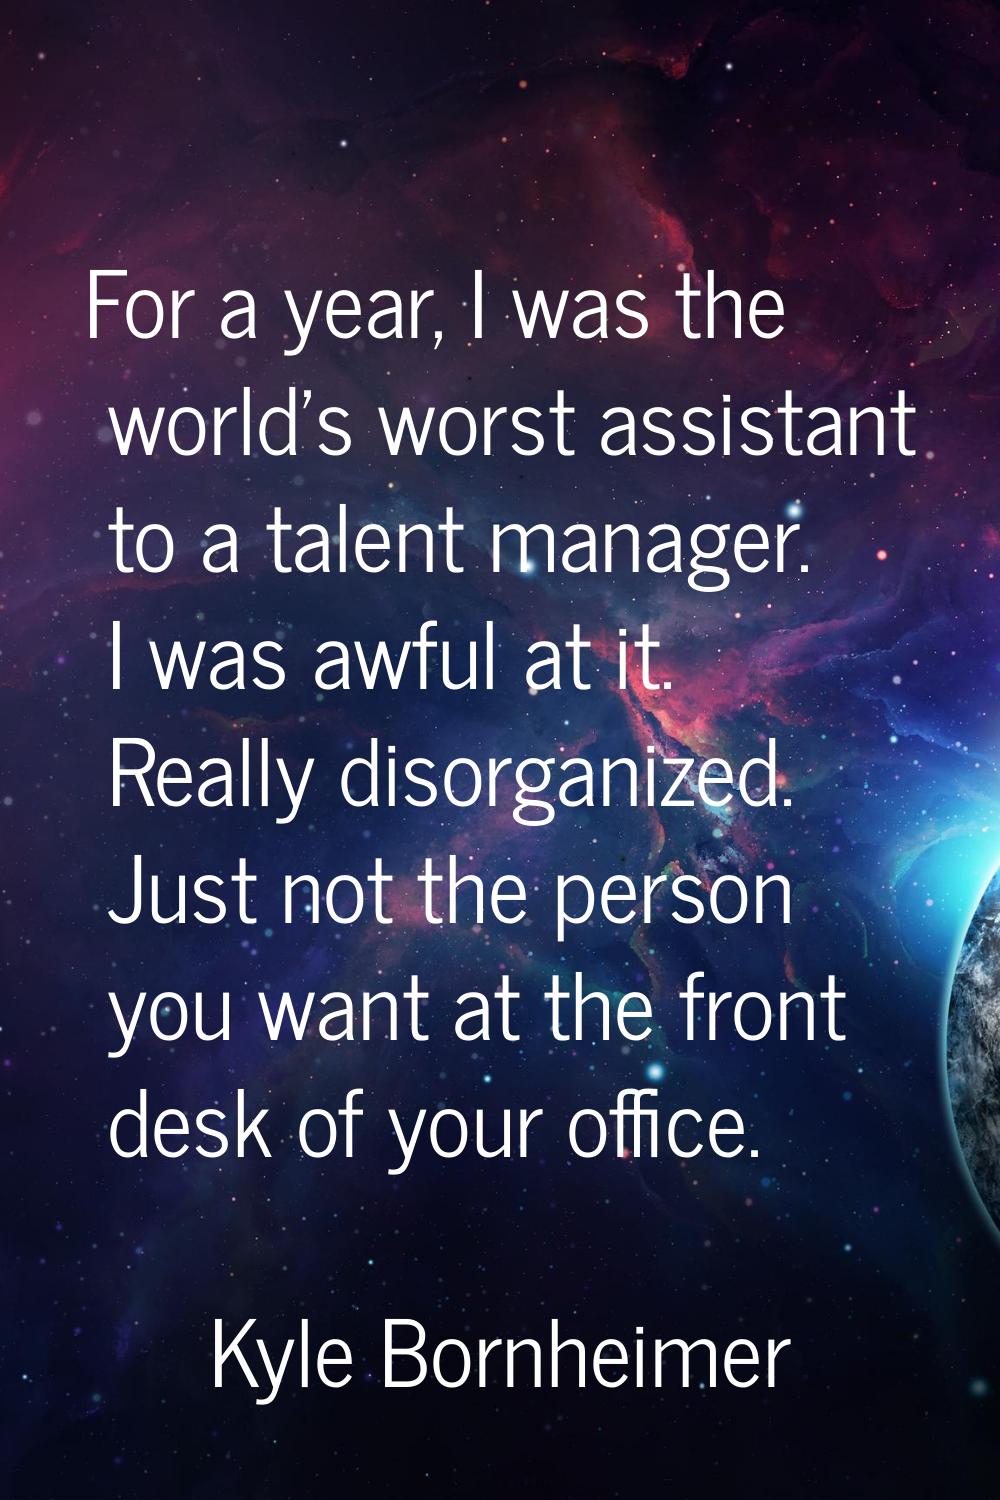 For a year, I was the world's worst assistant to a talent manager. I was awful at it. Really disorg